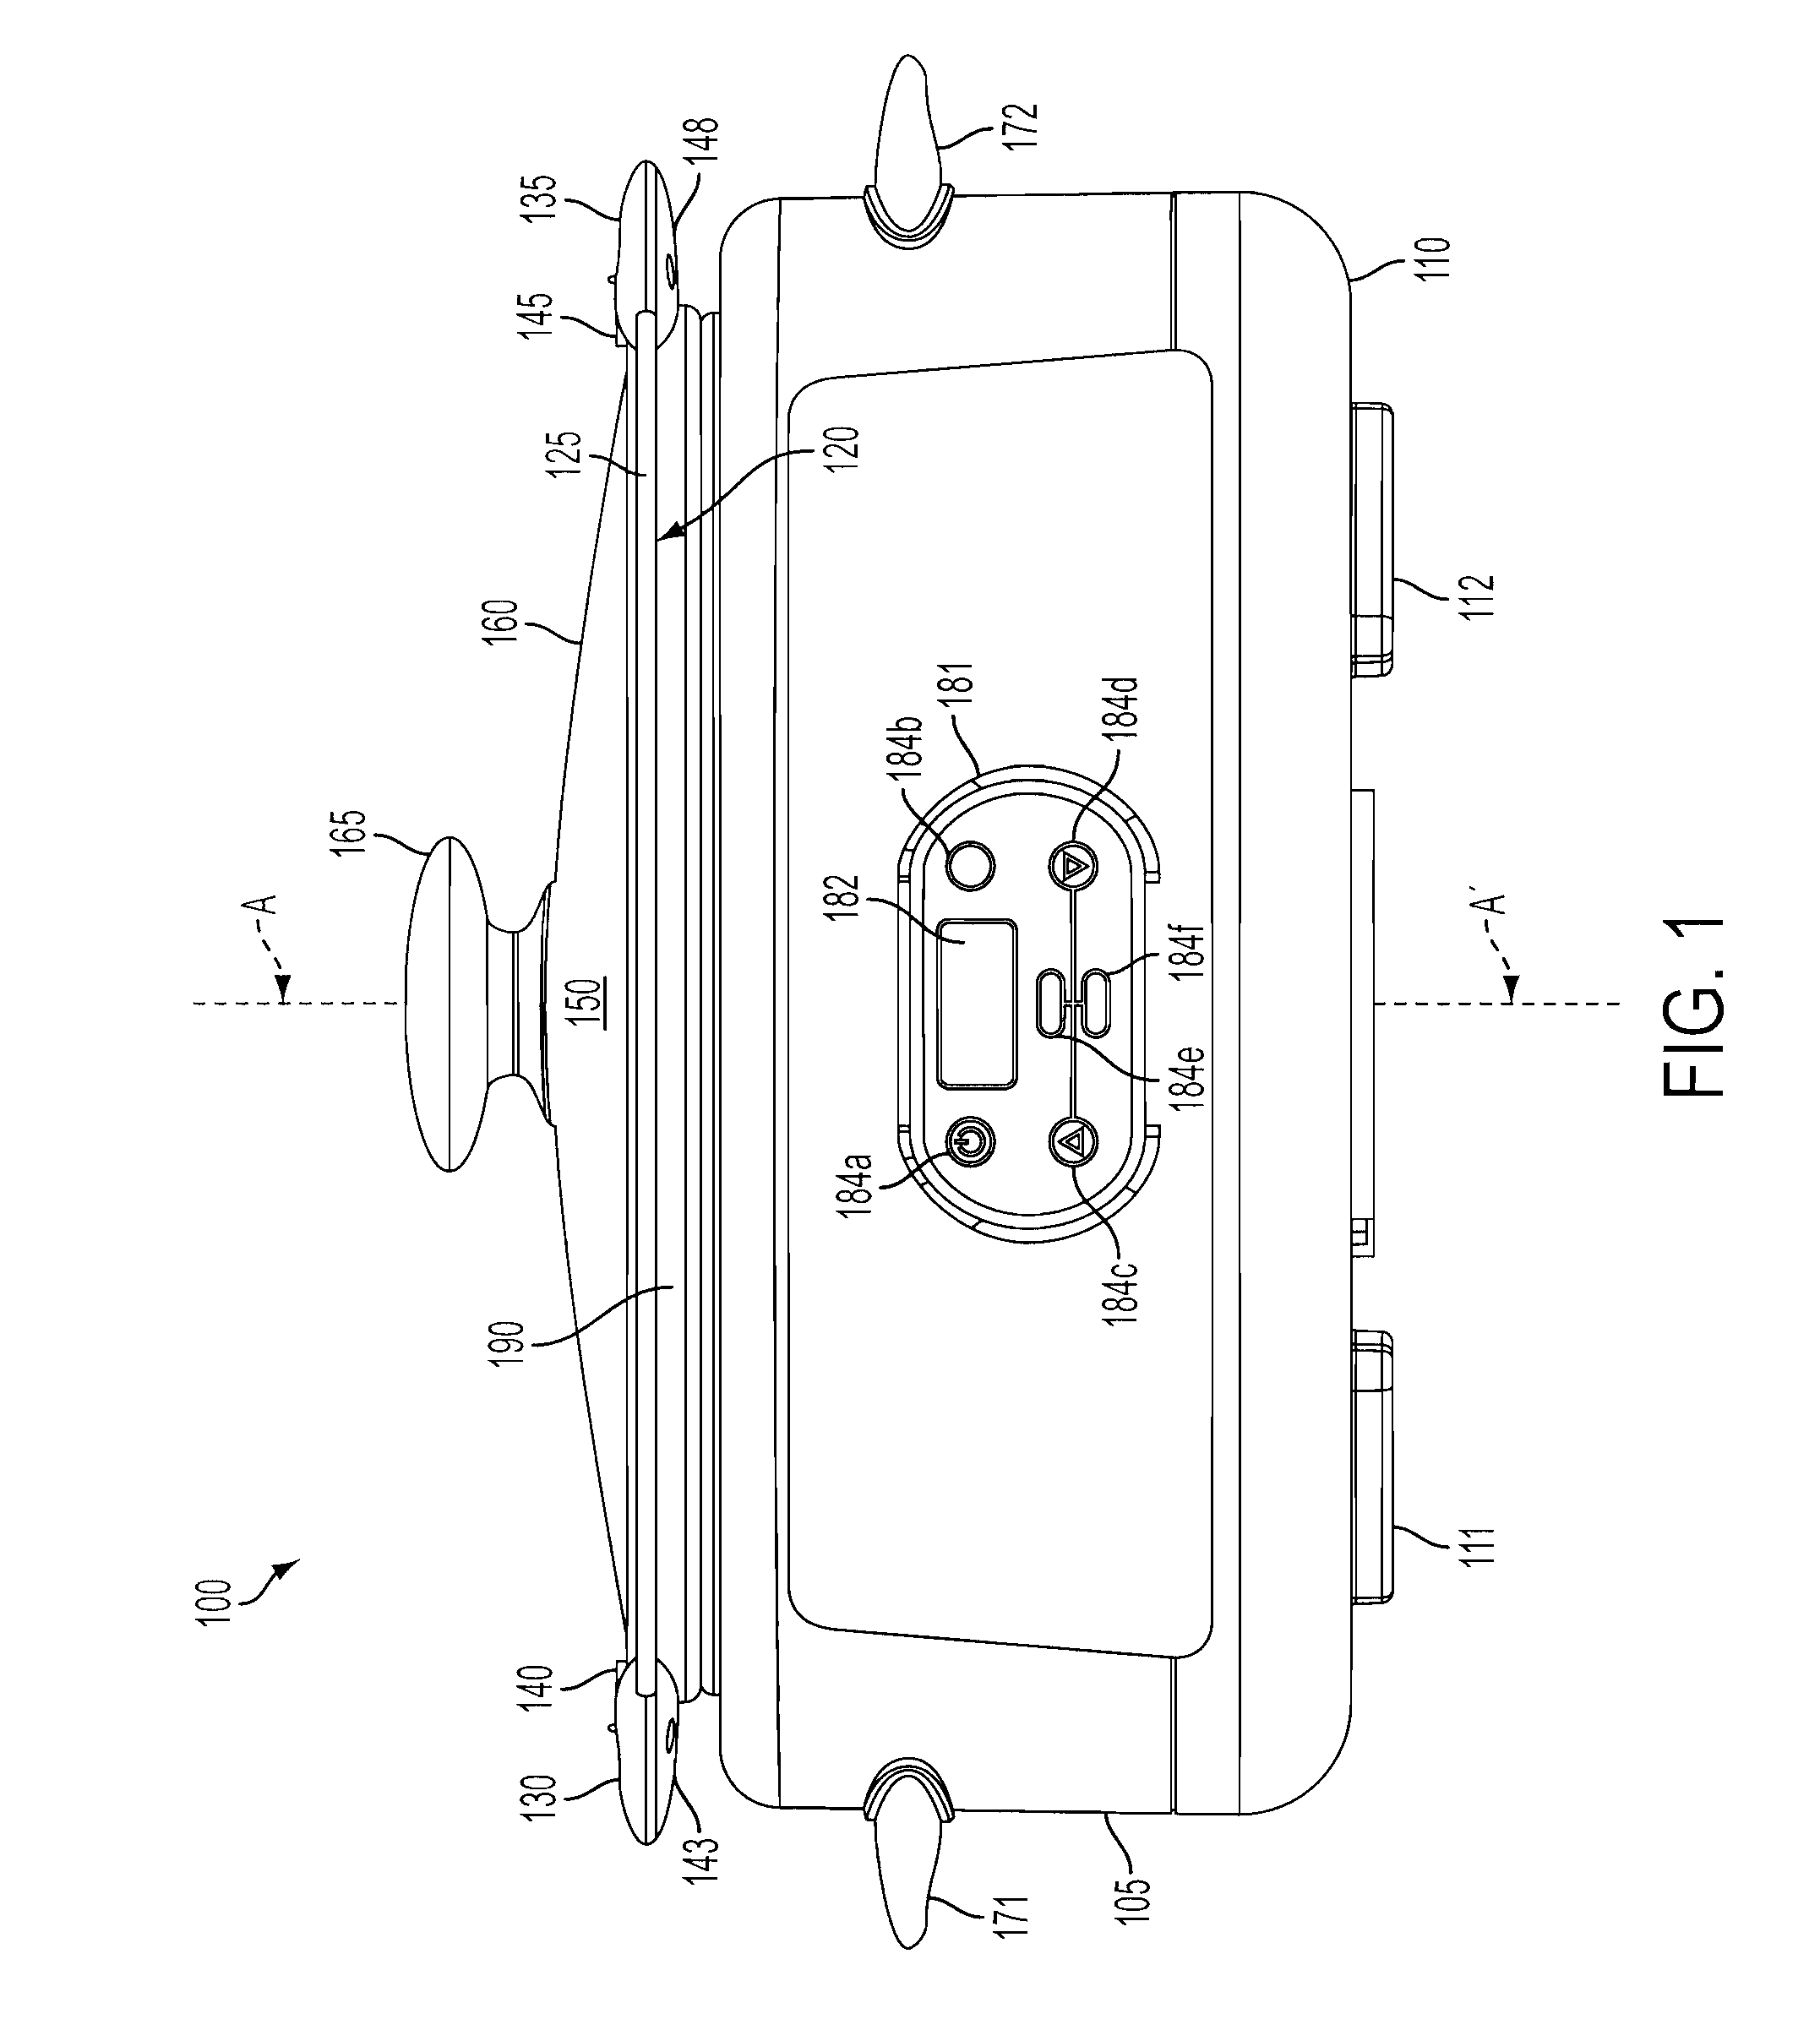 Cooking Apparatus and Method